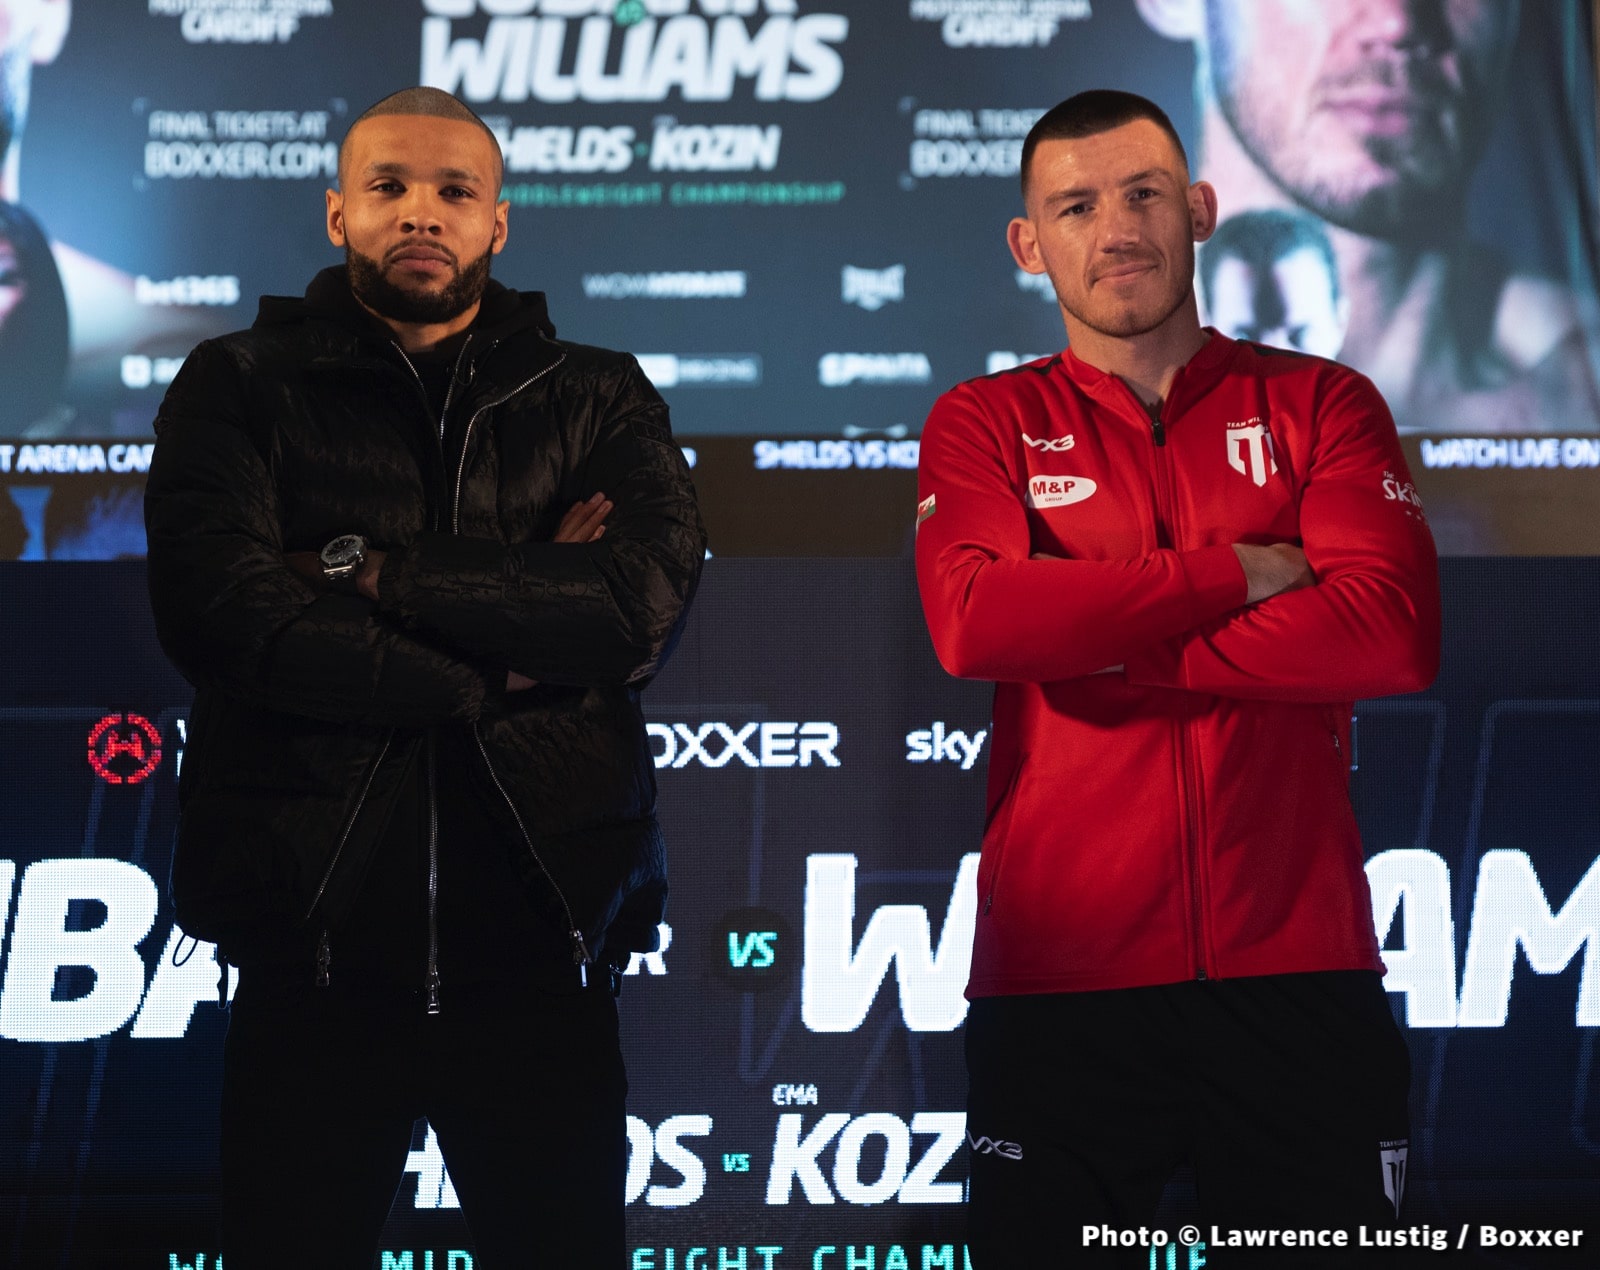 Image: Liam Williams in hot water with BBBofC, for 'Kill' comment about Eubank Jr